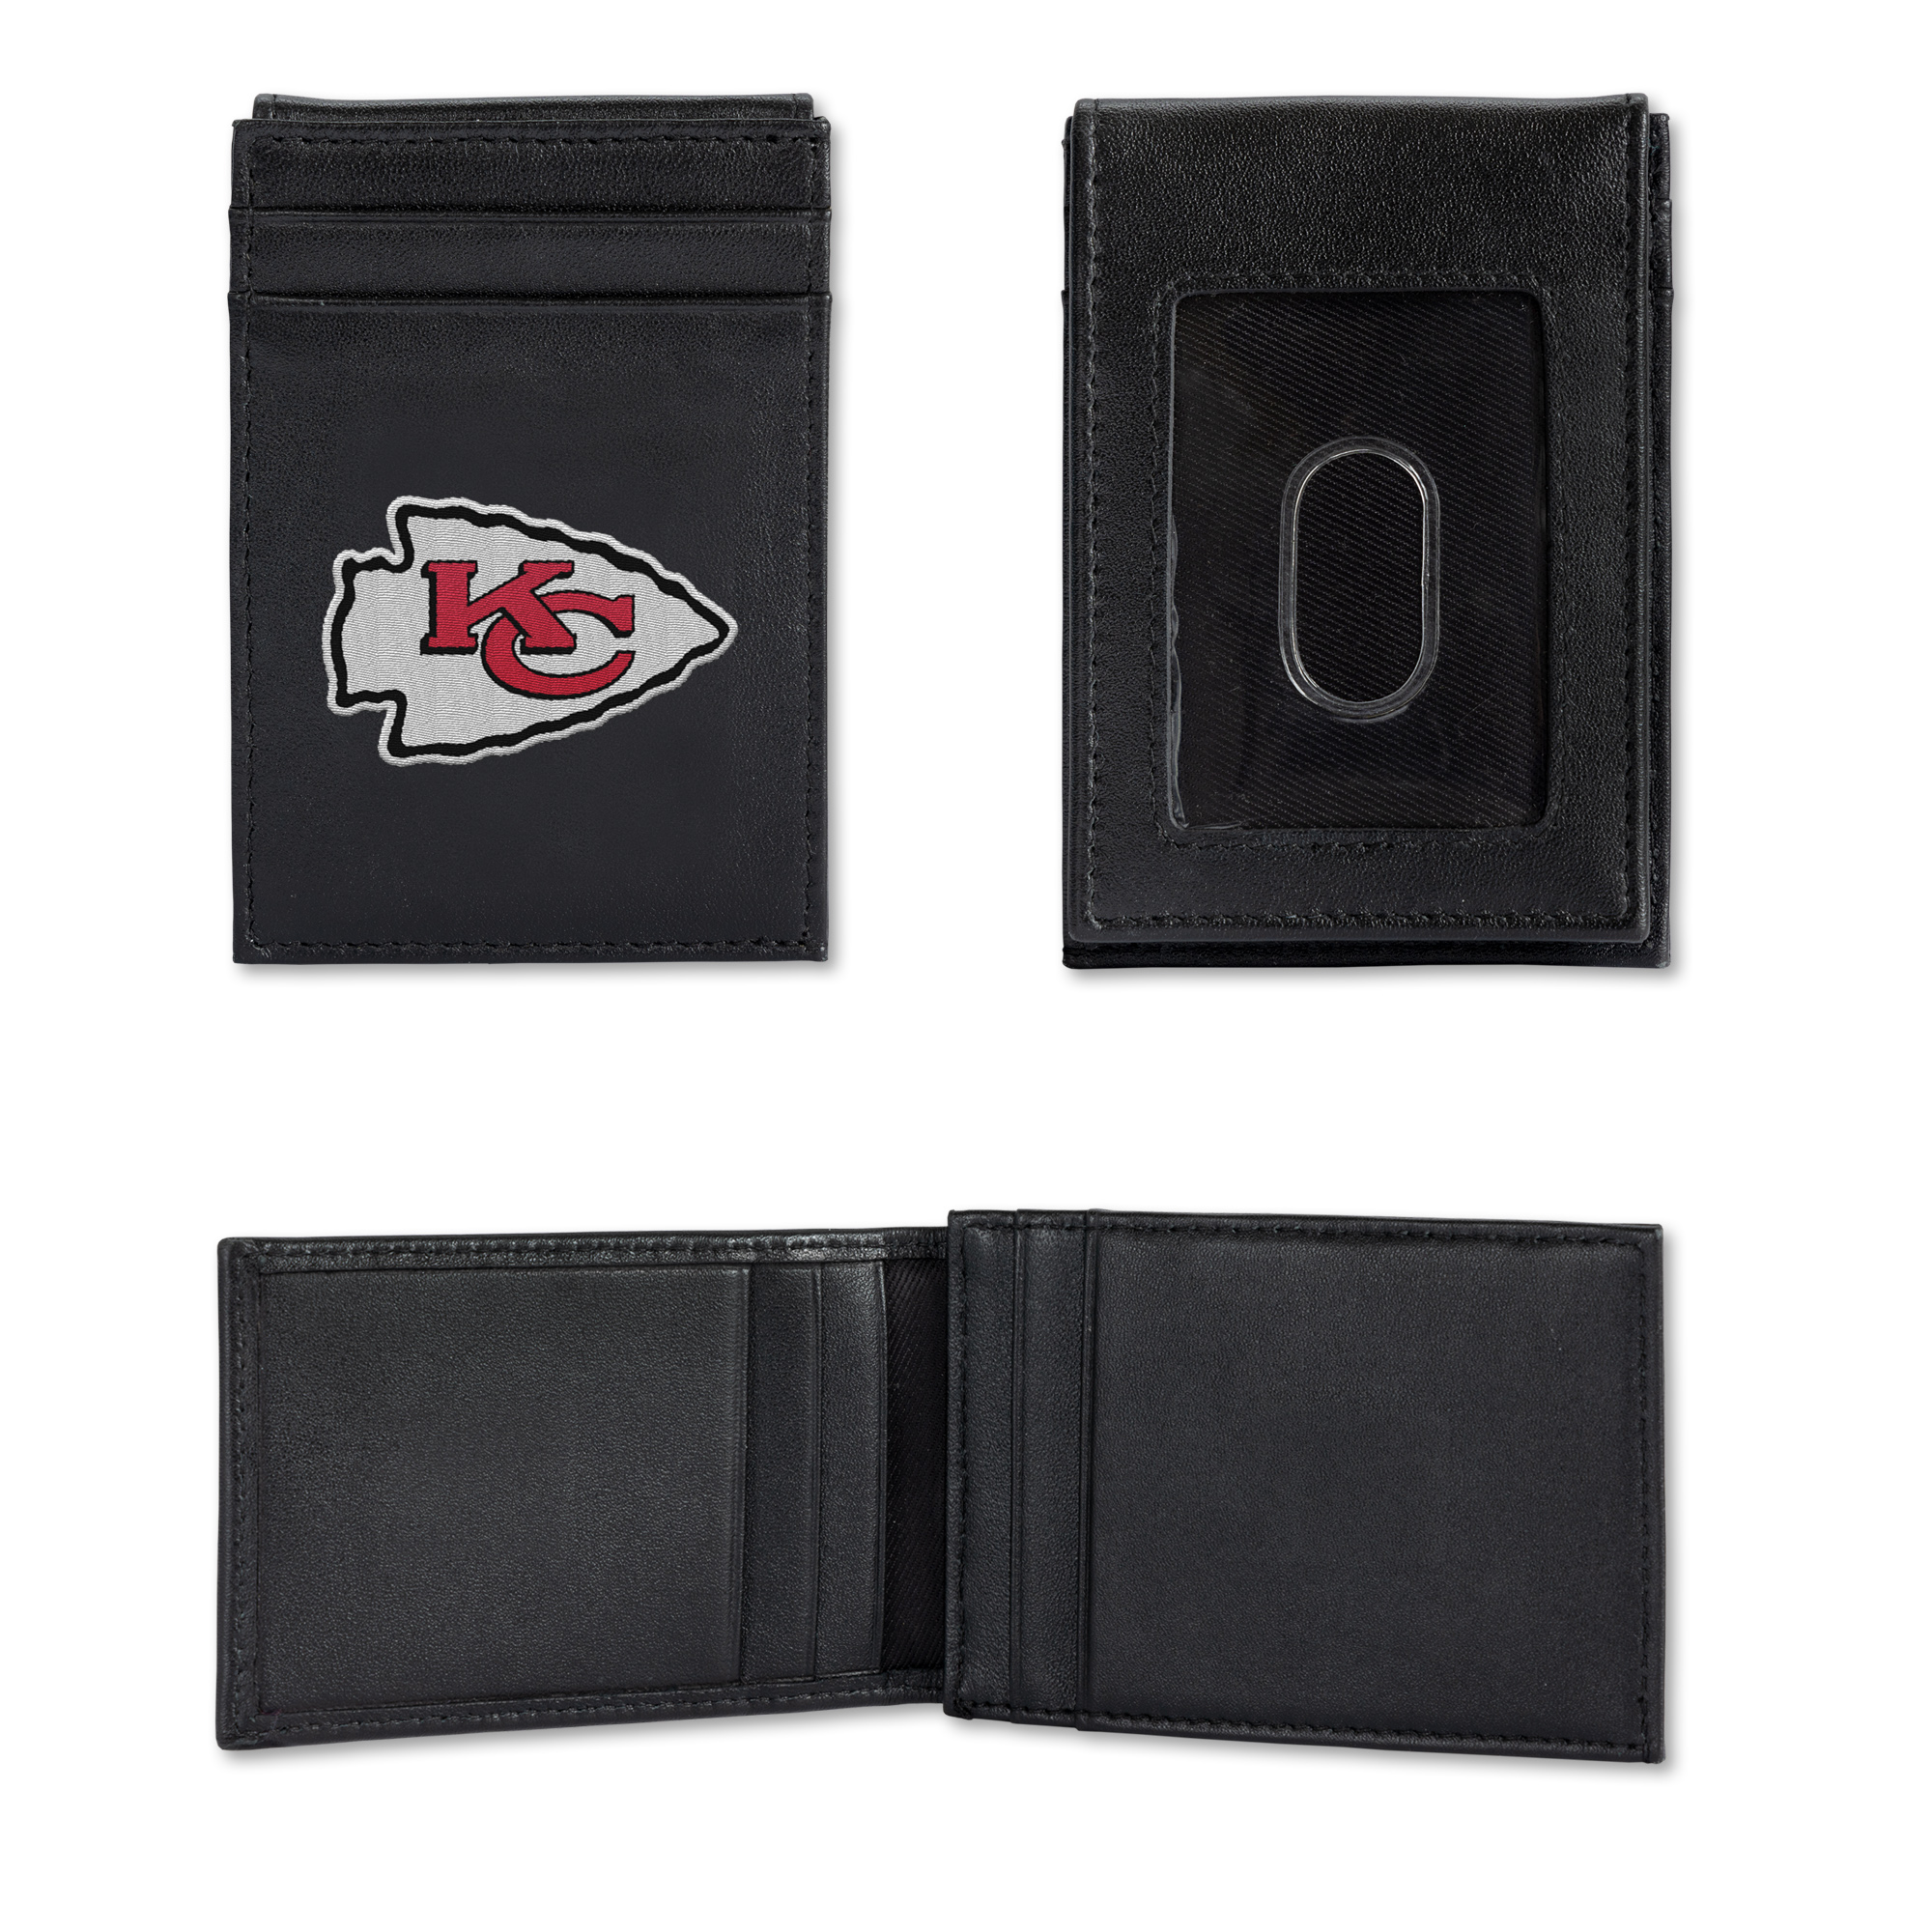 Rico NFL Rico Industries Kansas City Chiefs  Embroidered Front Pocket Wallet